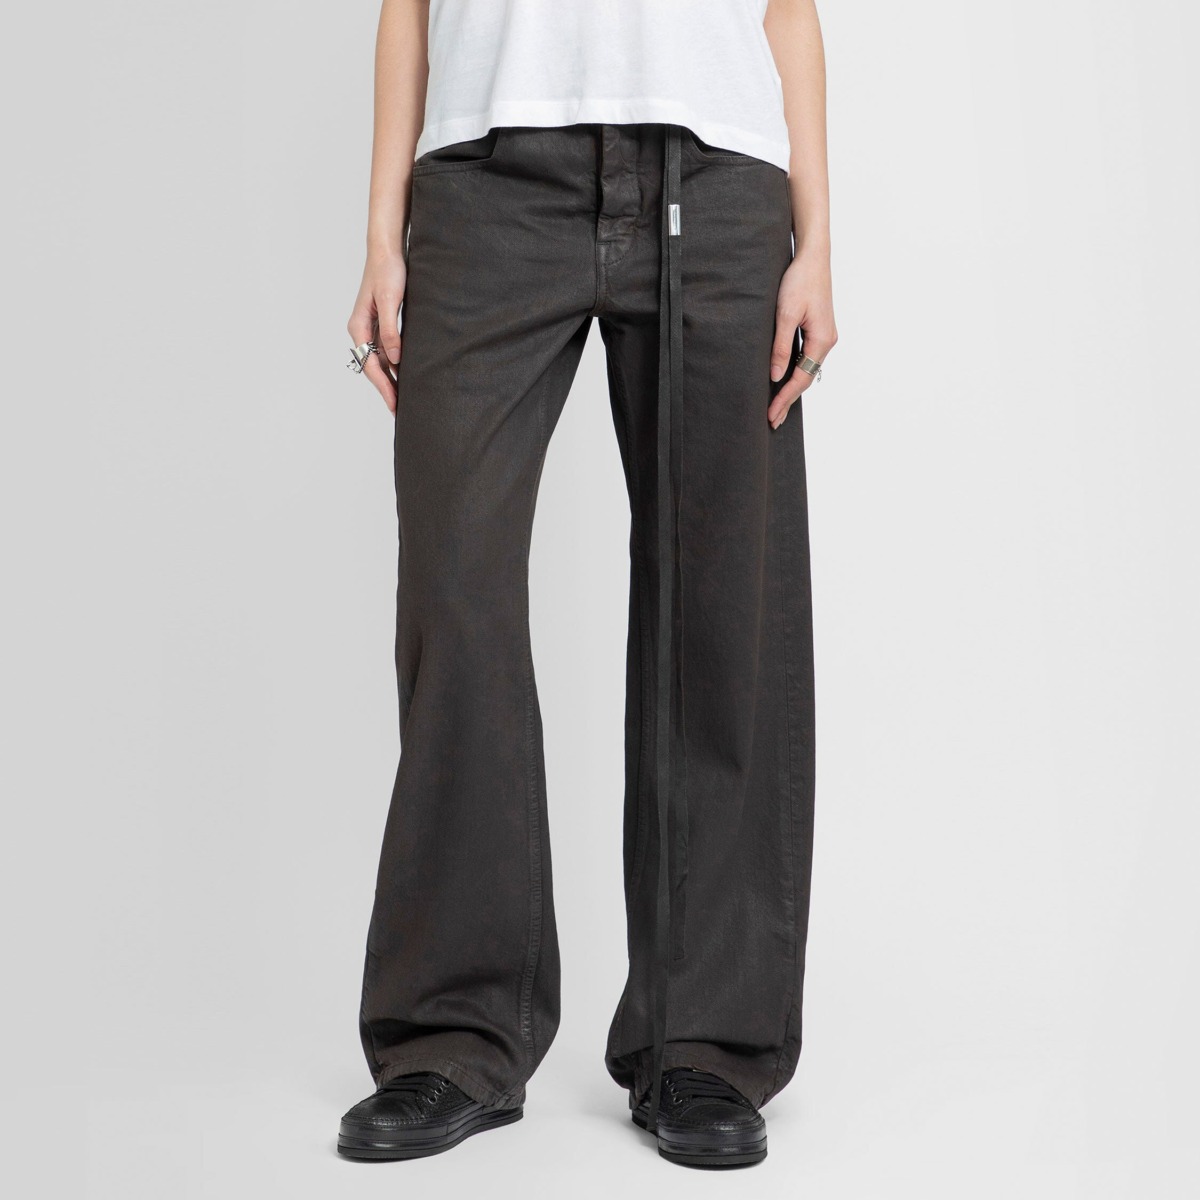 Jeans Brown for Woman from Antonioli GOOFASH